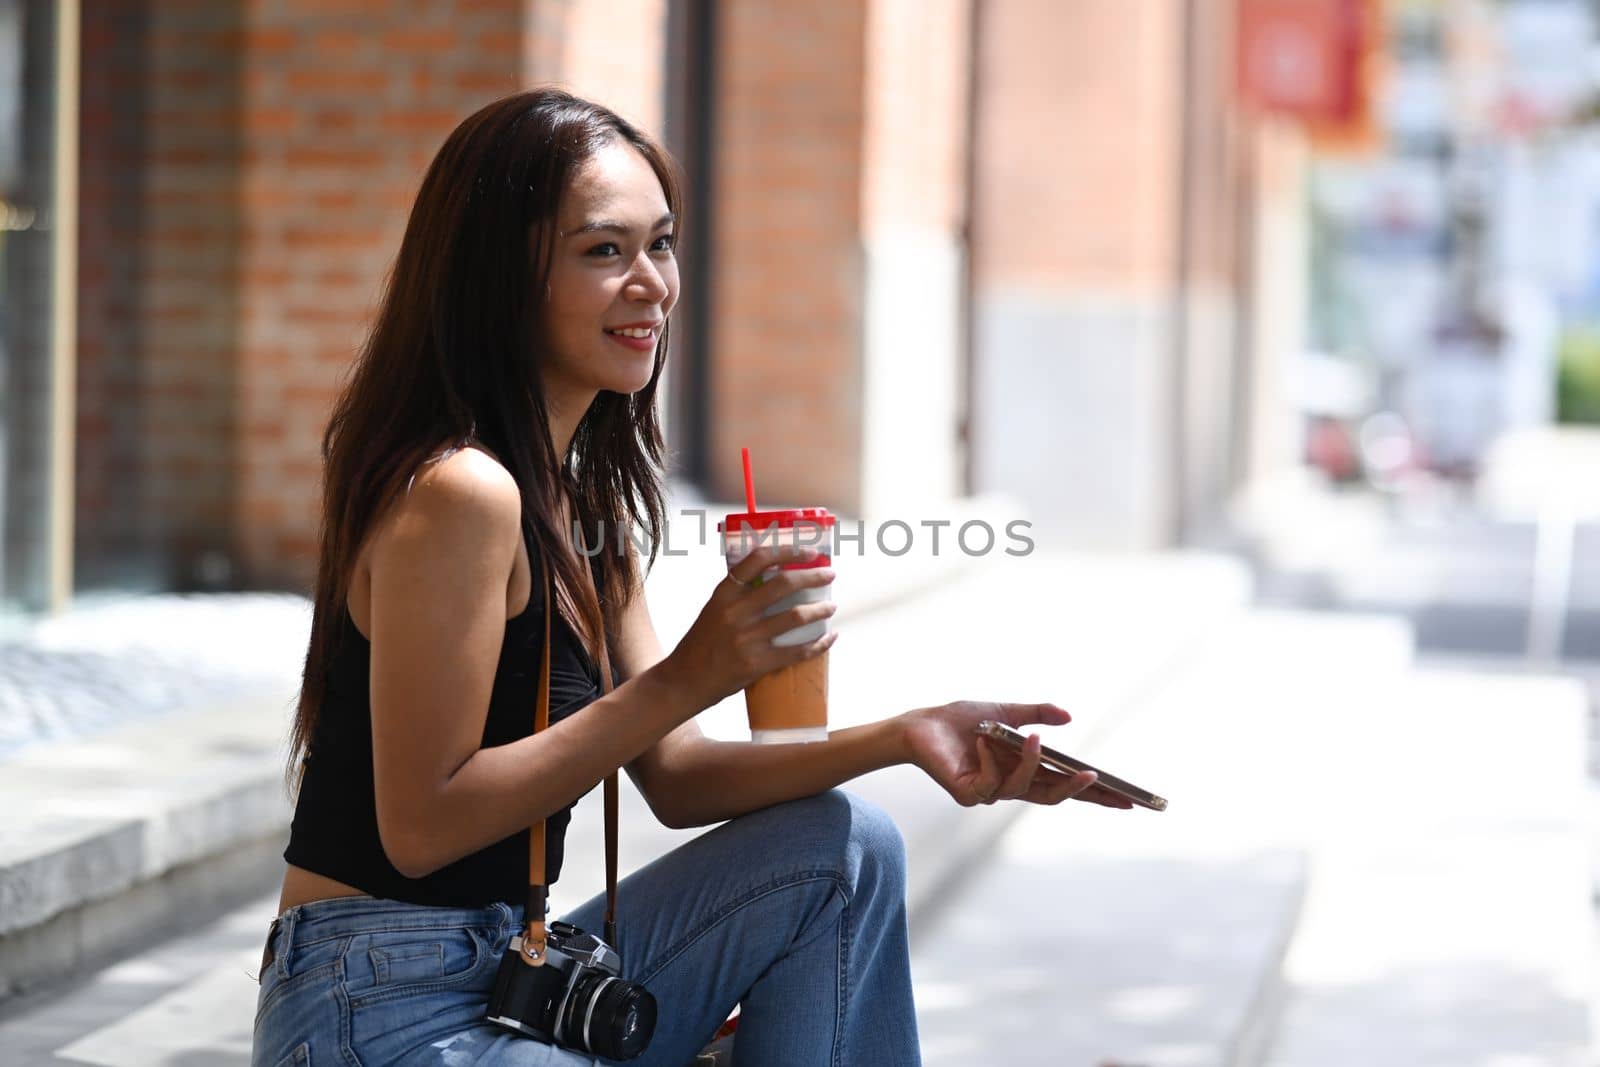 Smiling young woman sitting outdoor holding ice coffee and using smart phone.